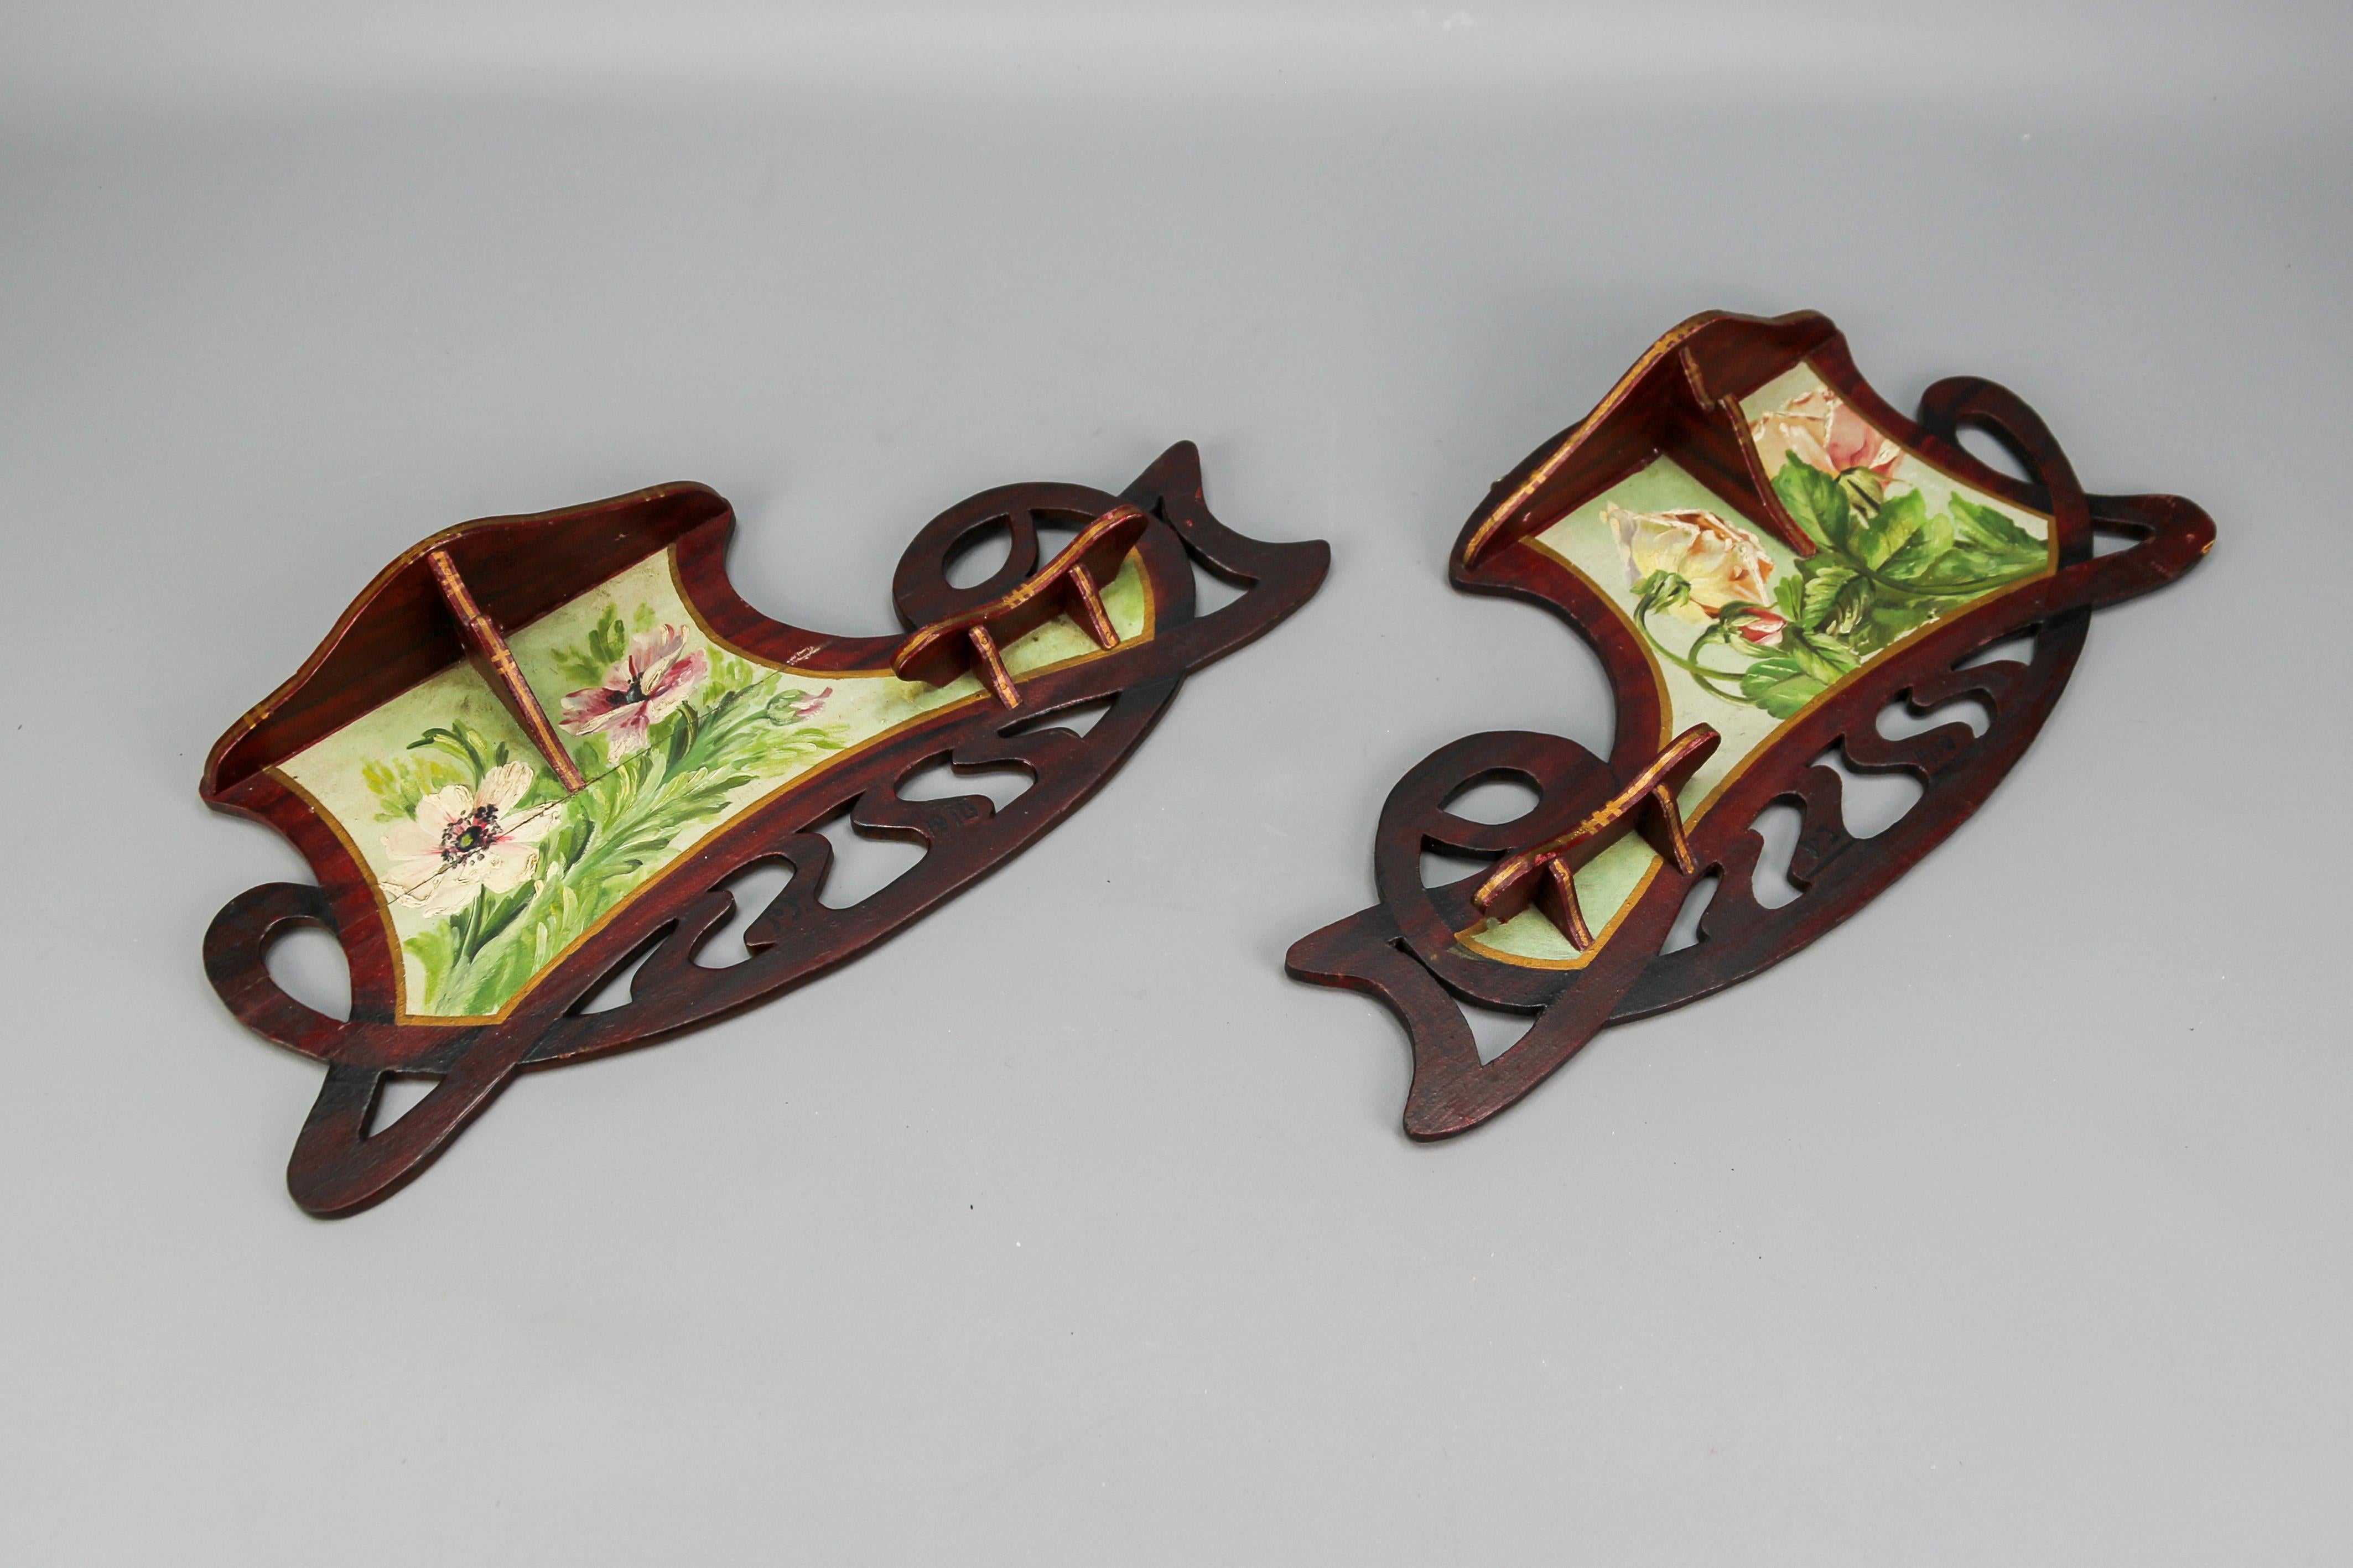 Pair of Art Nouveau Wooden Hand-Painted Floral Shelves, Germany, 1910 In Good Condition For Sale In Barntrup, DE